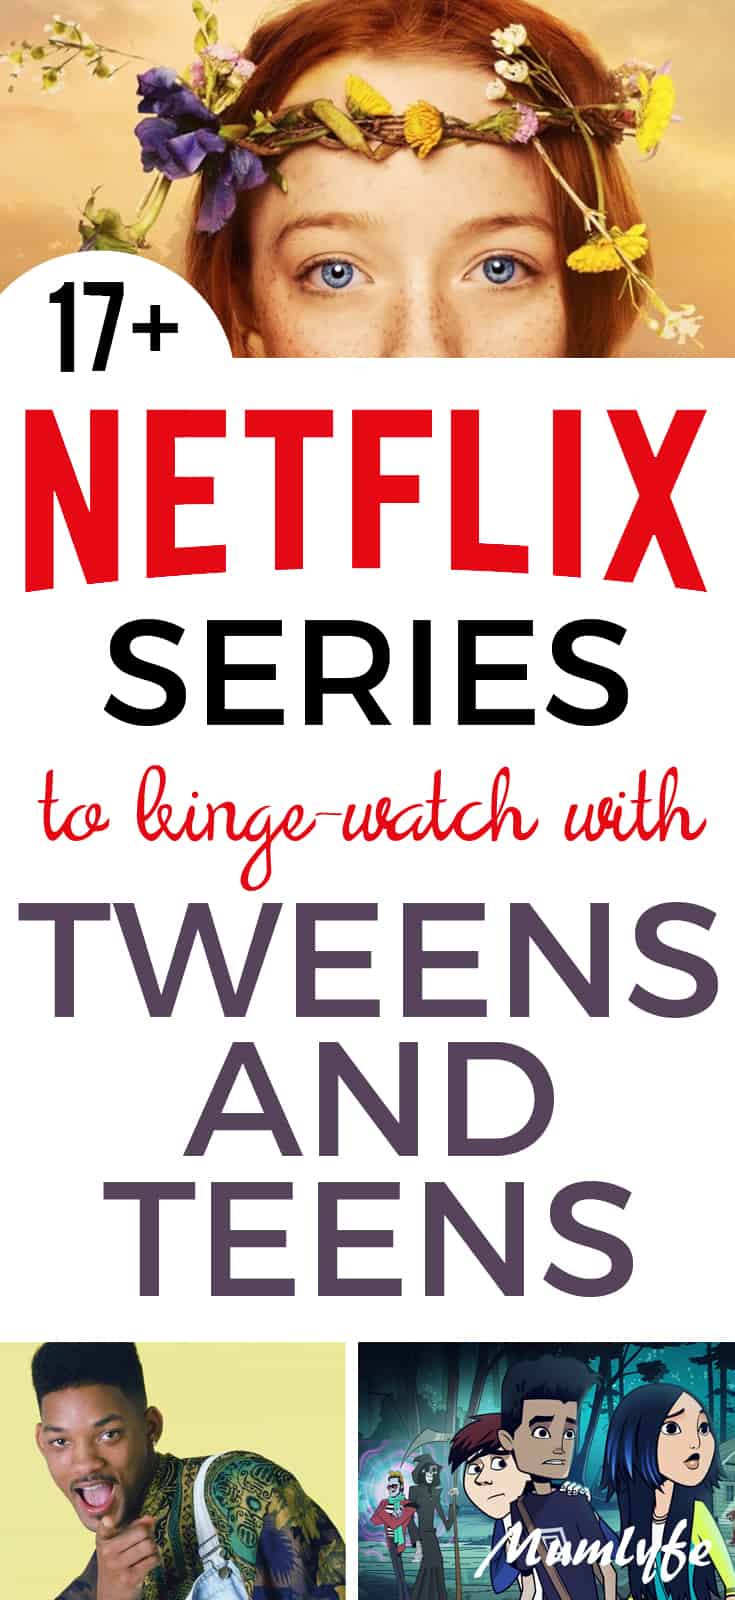 Netflix series for tweens and teens you'll want to binge-watch too